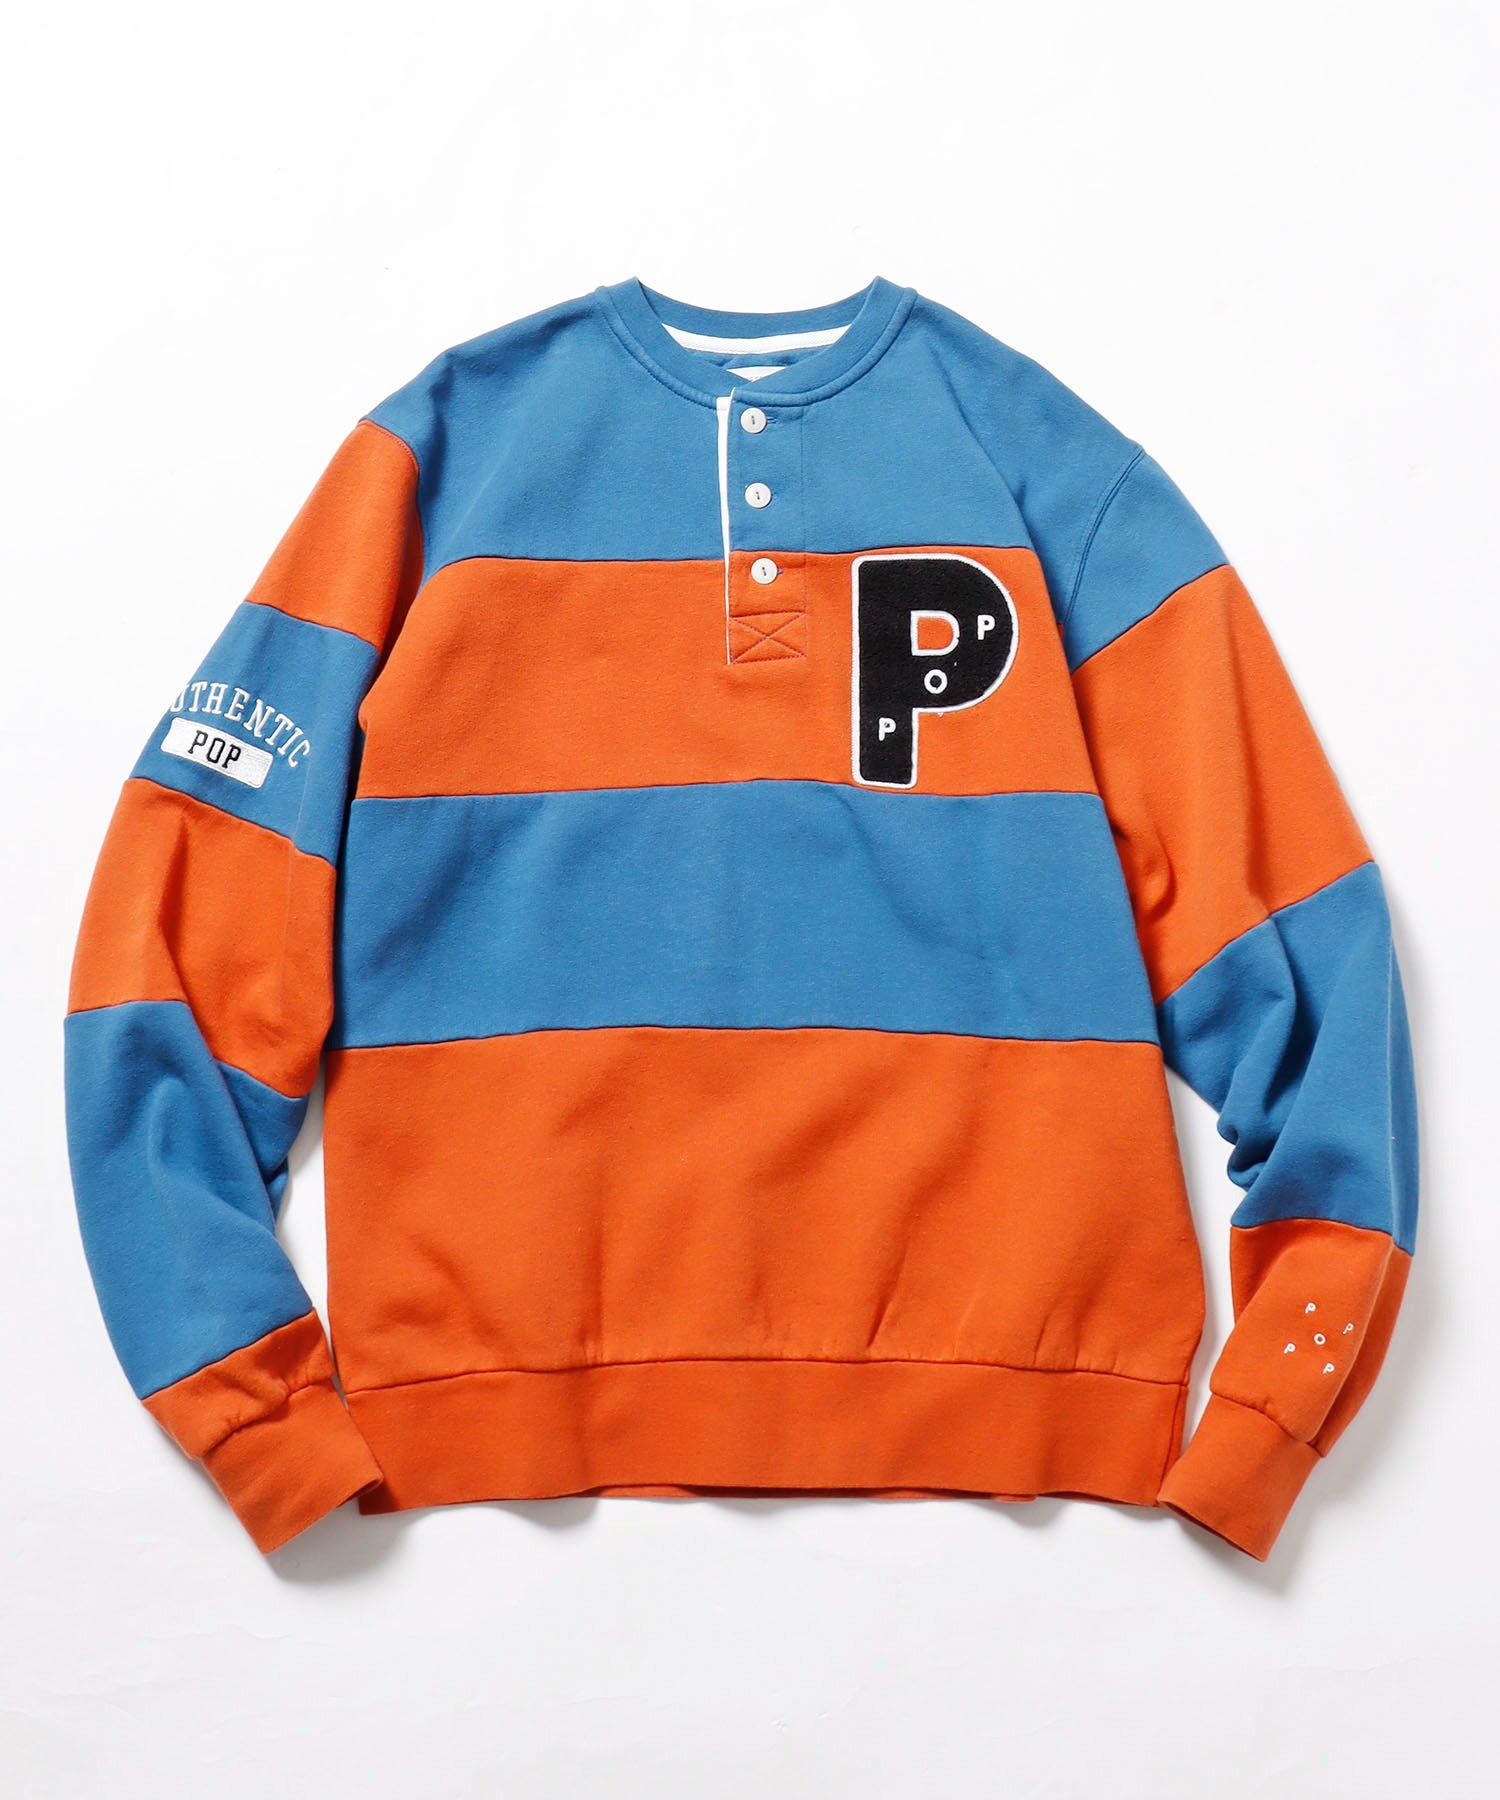 POP TRADING COMPANY/ポップトレーディングカンパニー striped henley rugby sweat